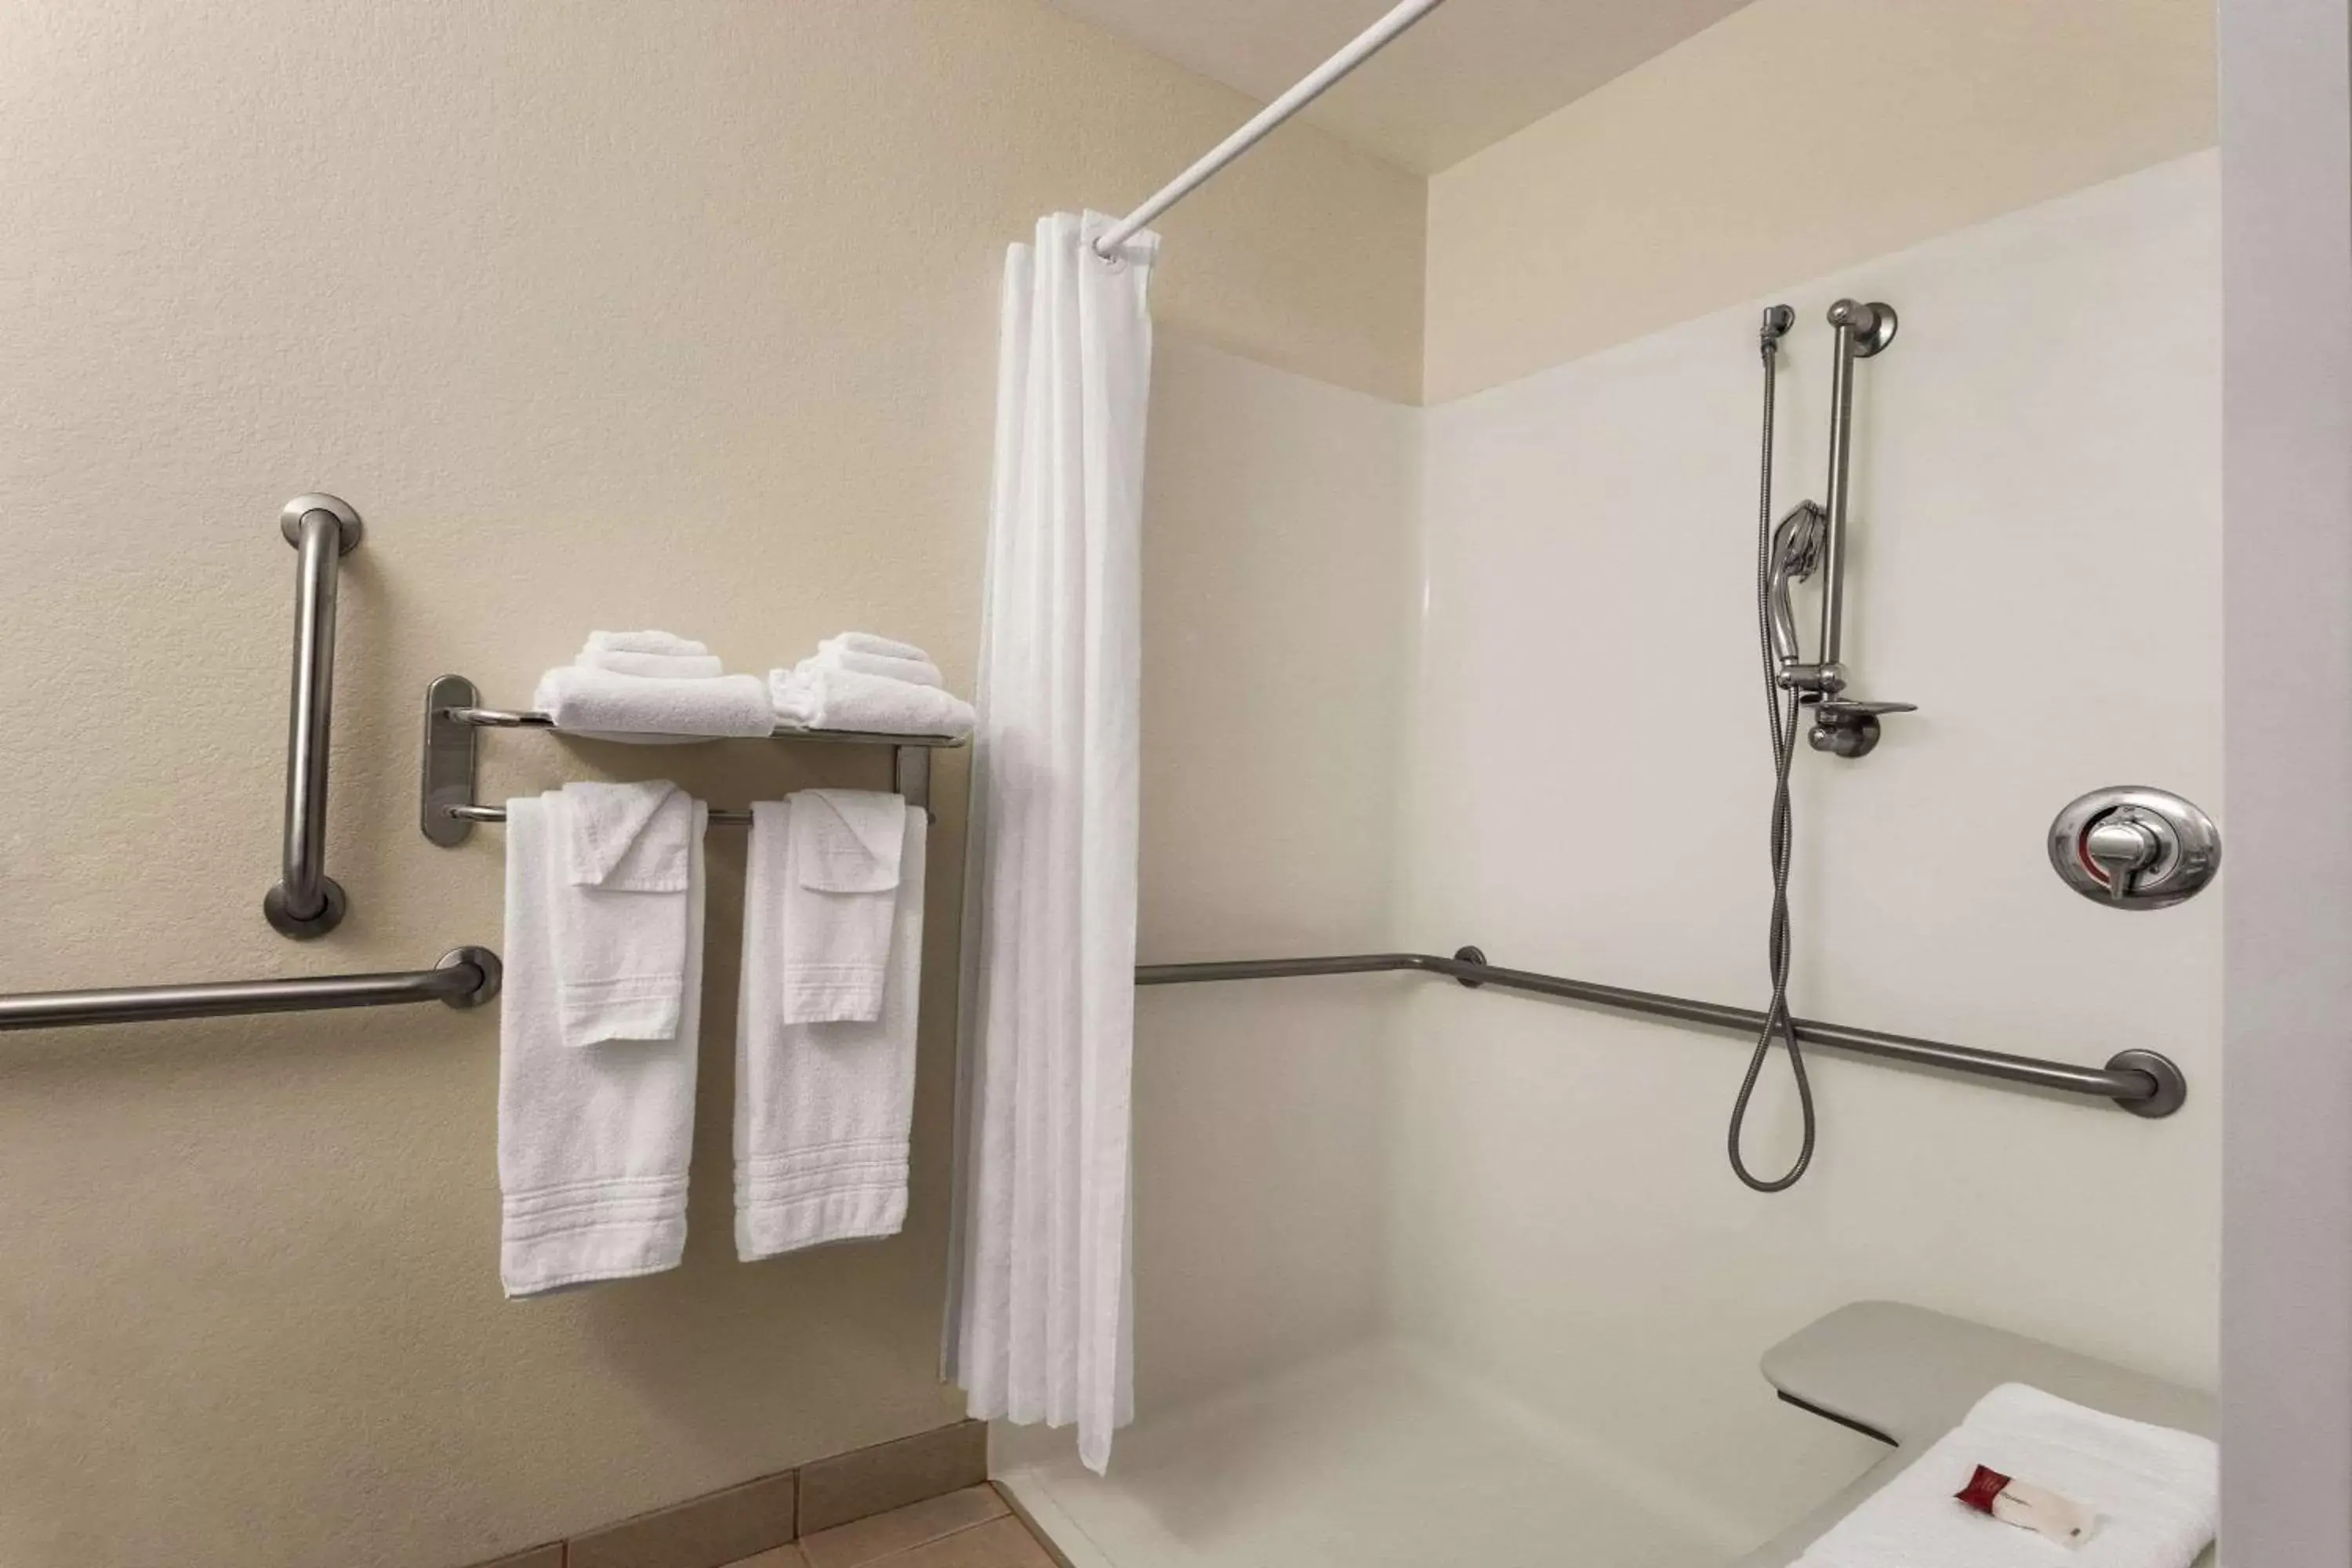 Bathroom in Microtel Inn and Suites - Inver Grove Heights